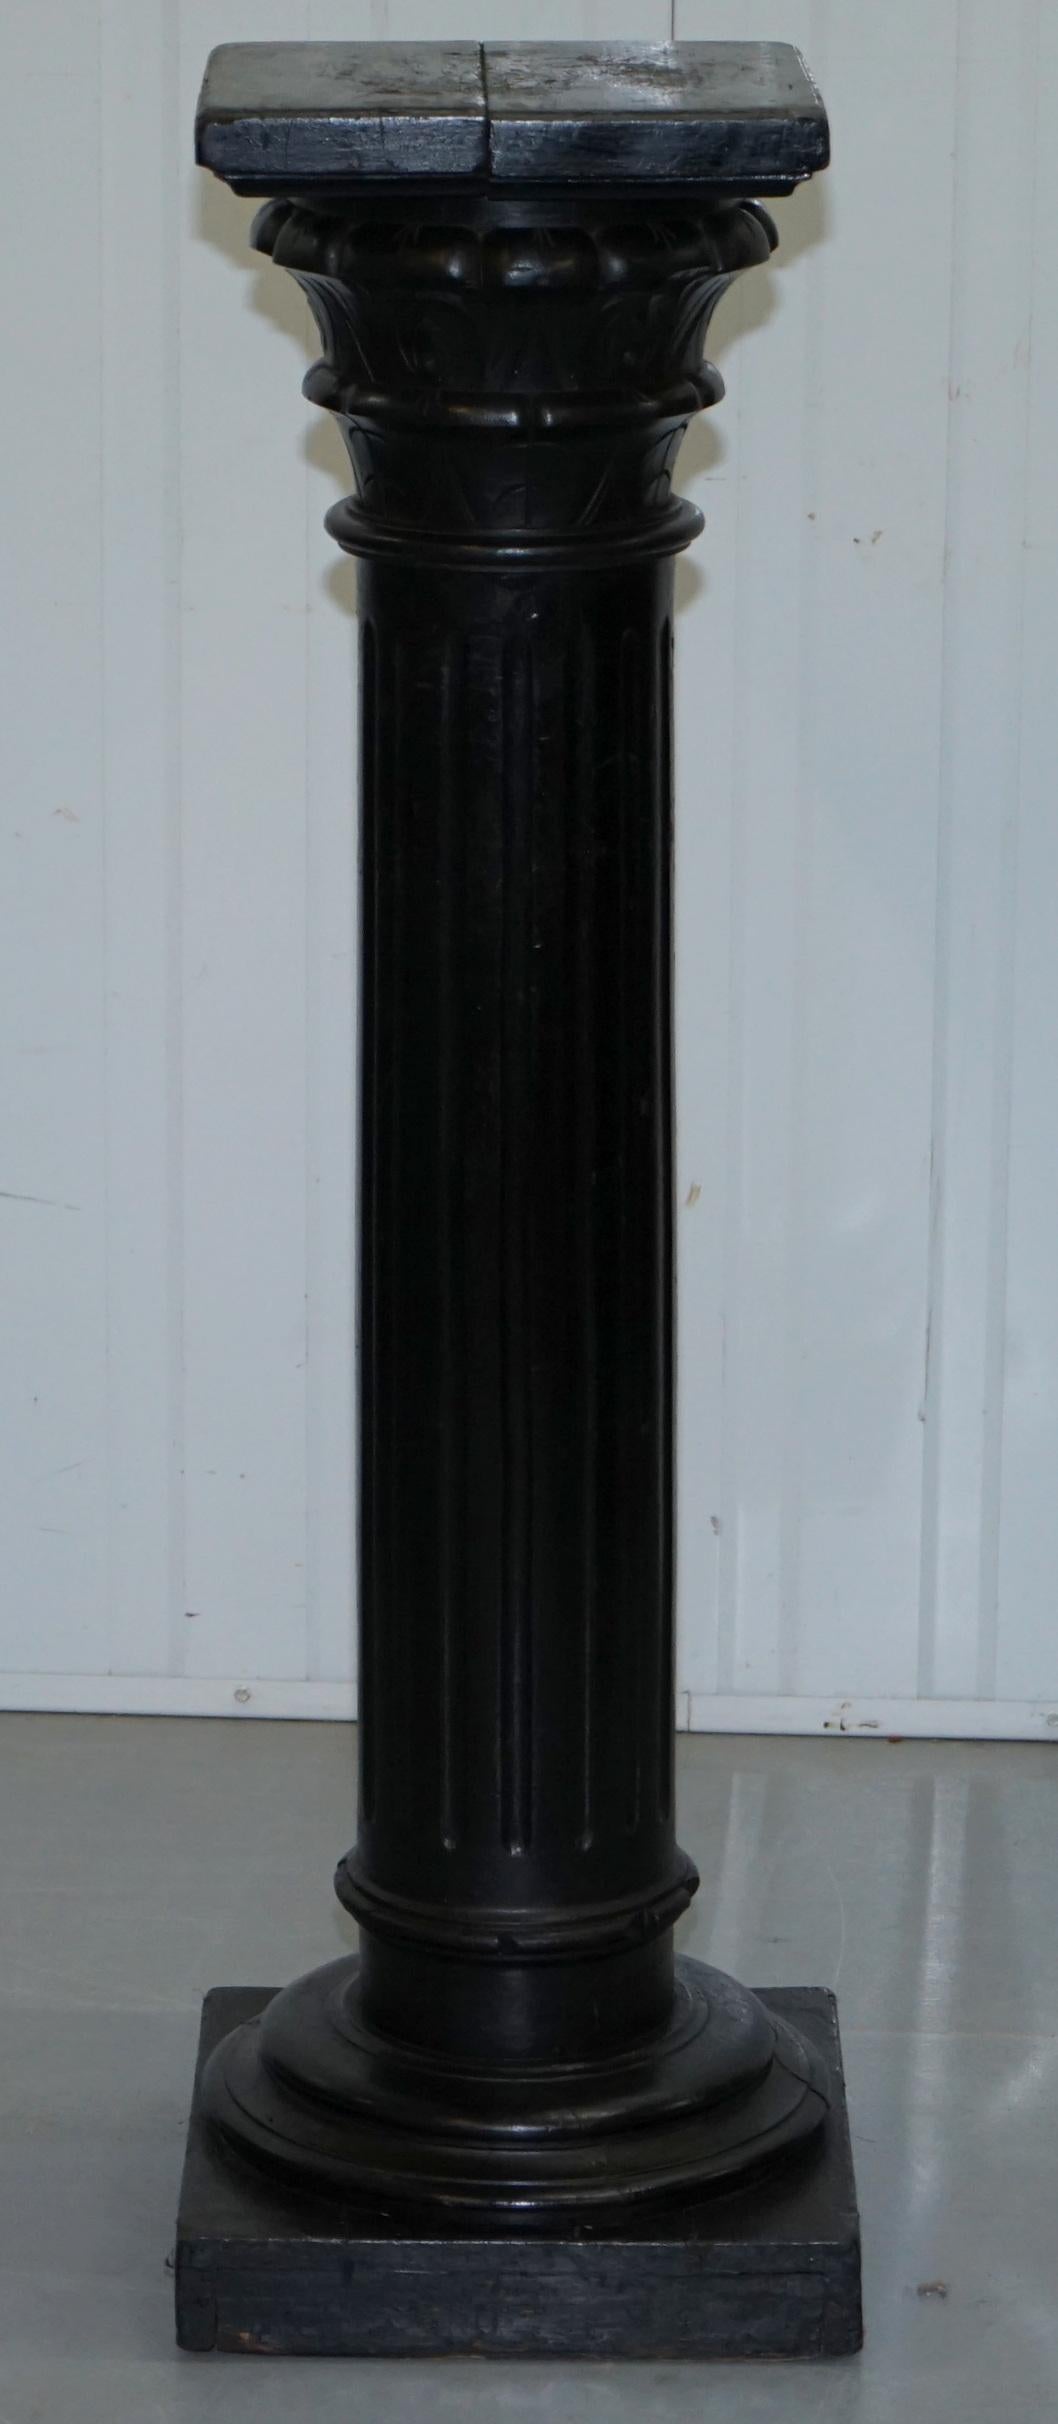 We are delighted to offer for sale this original Victorian circa 1880 ebonised black Corinthian Pillar pedestal stand for displaying art pieces 

A good looking and decorative piece, the ebosnied finished is original, distressed in places as you